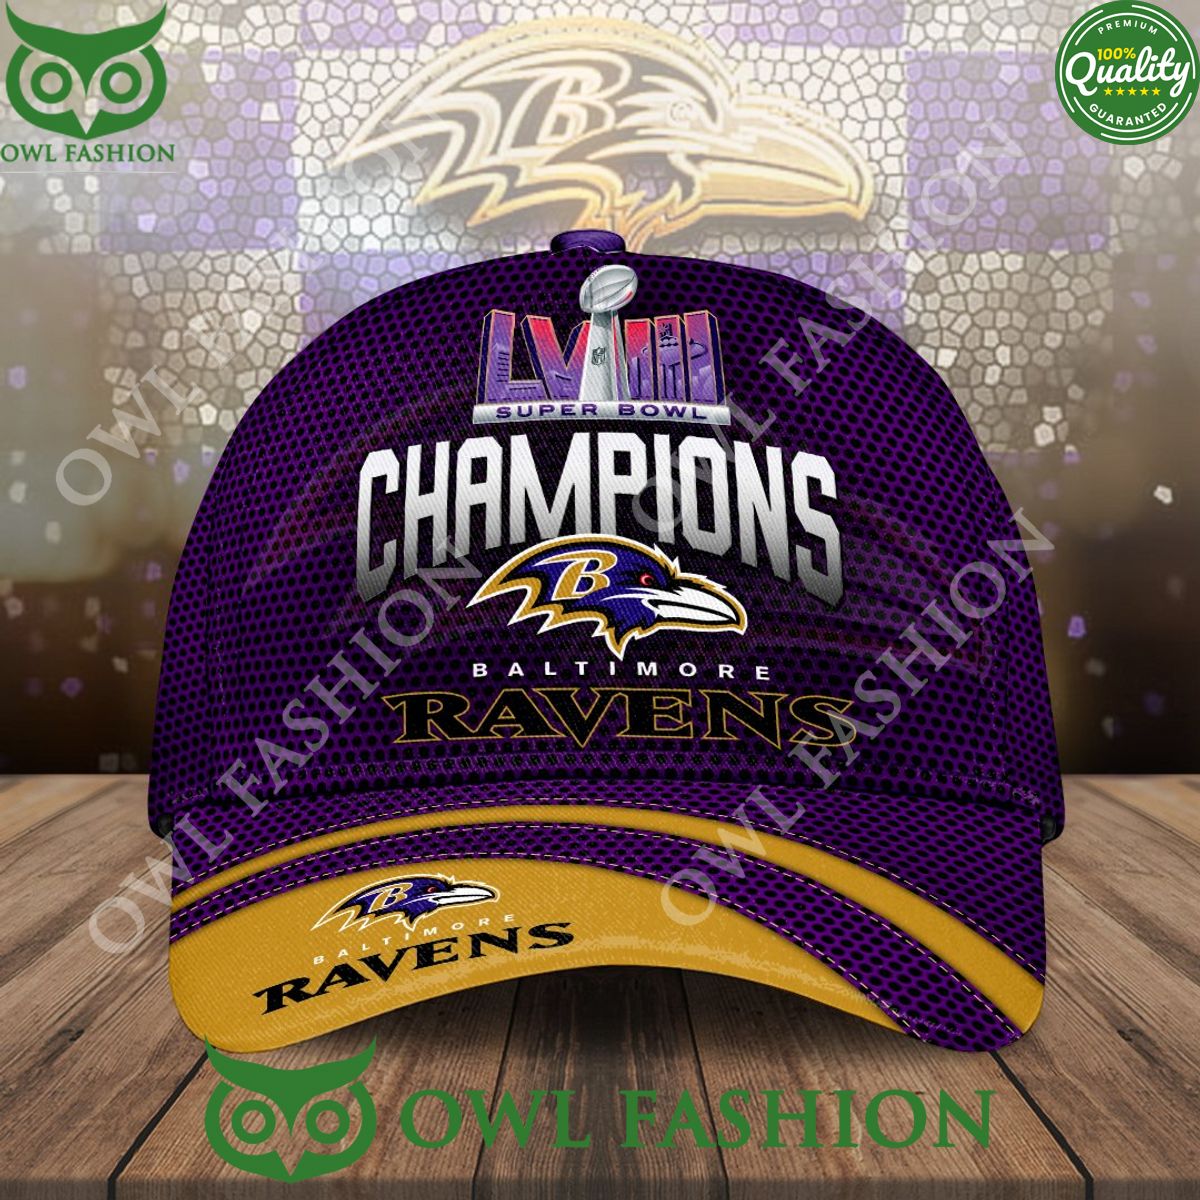 Baltimore Ravens Super Bowl Champions Classic Cap You look so healthy and fit